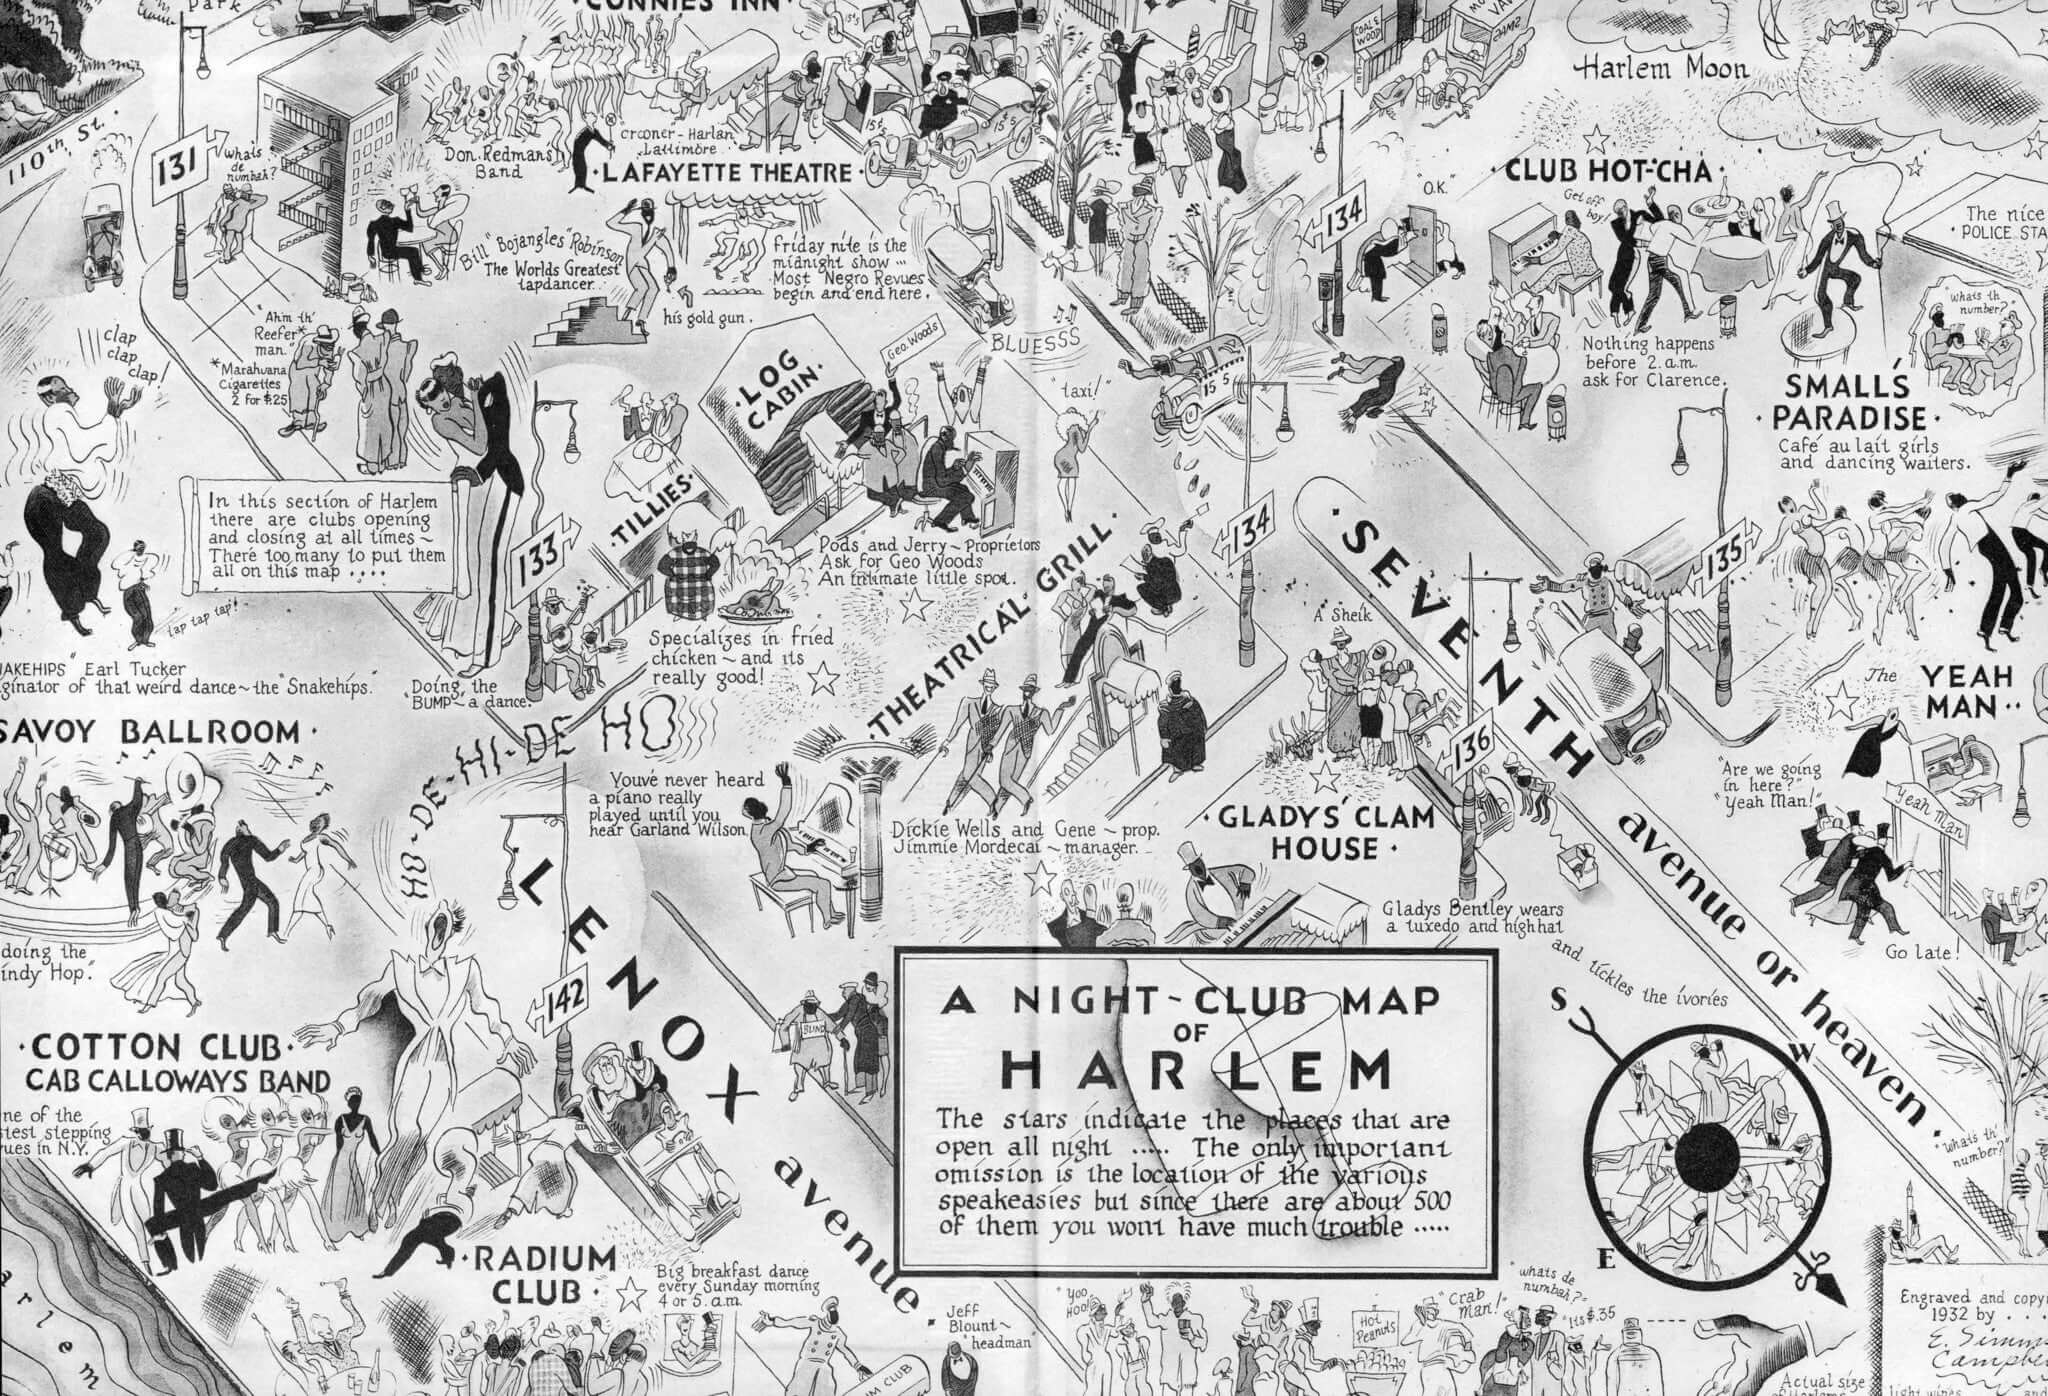 An black and white image of our Night Club Map of Harlem.